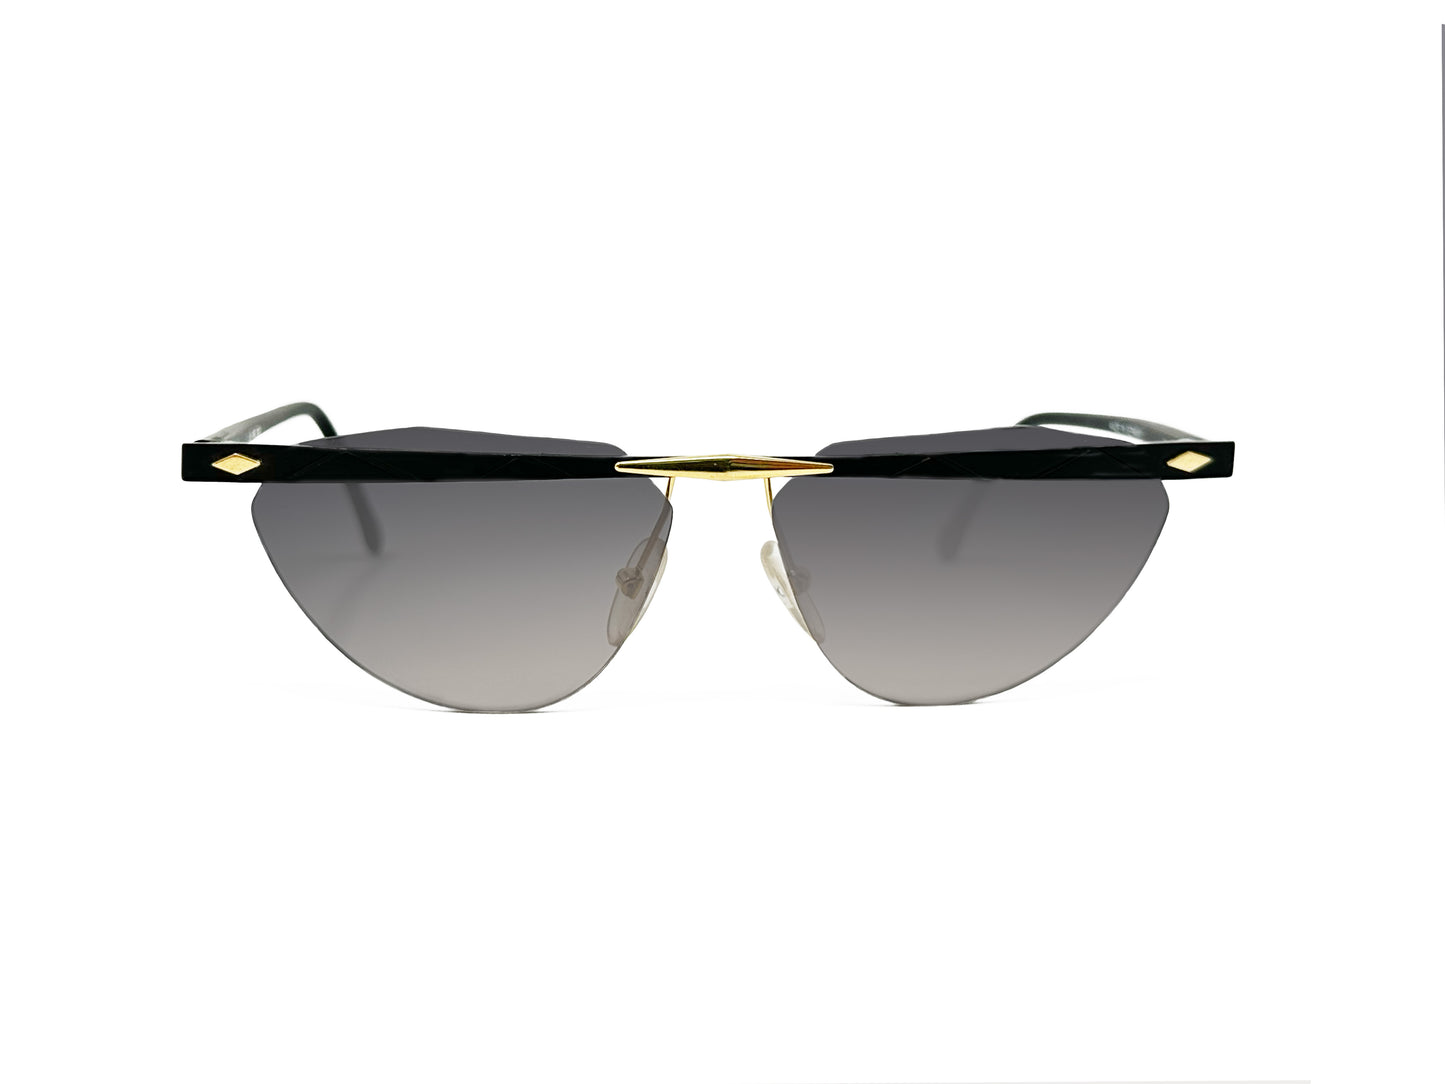 Alibi curved, triangular, sunglass with flat-top bar across front. Model: 060. Color: 10, black and gold metal. Front view. 